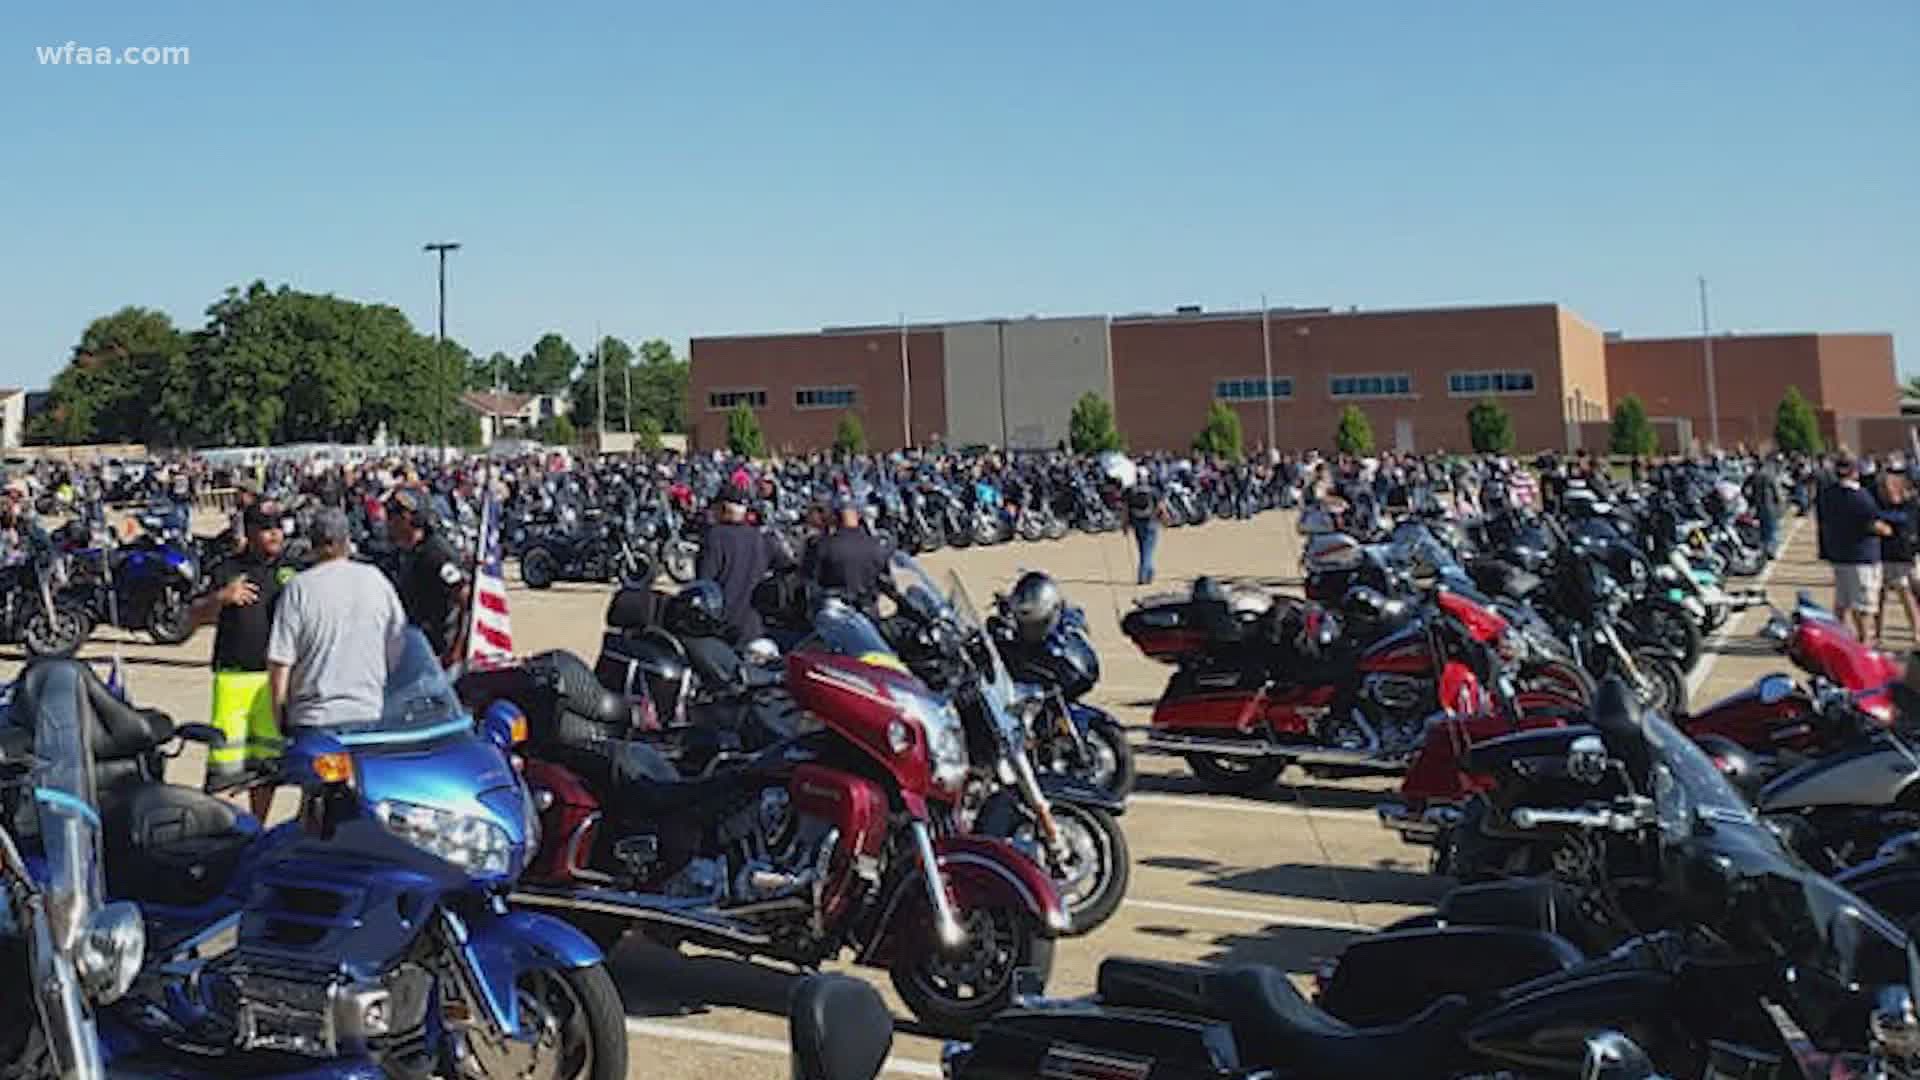 A pro-police parade of at least 1,000 vehicles stopped in the parking lot of Friendshp West – a congregation closely aligned with the Black Lives Matter movement.